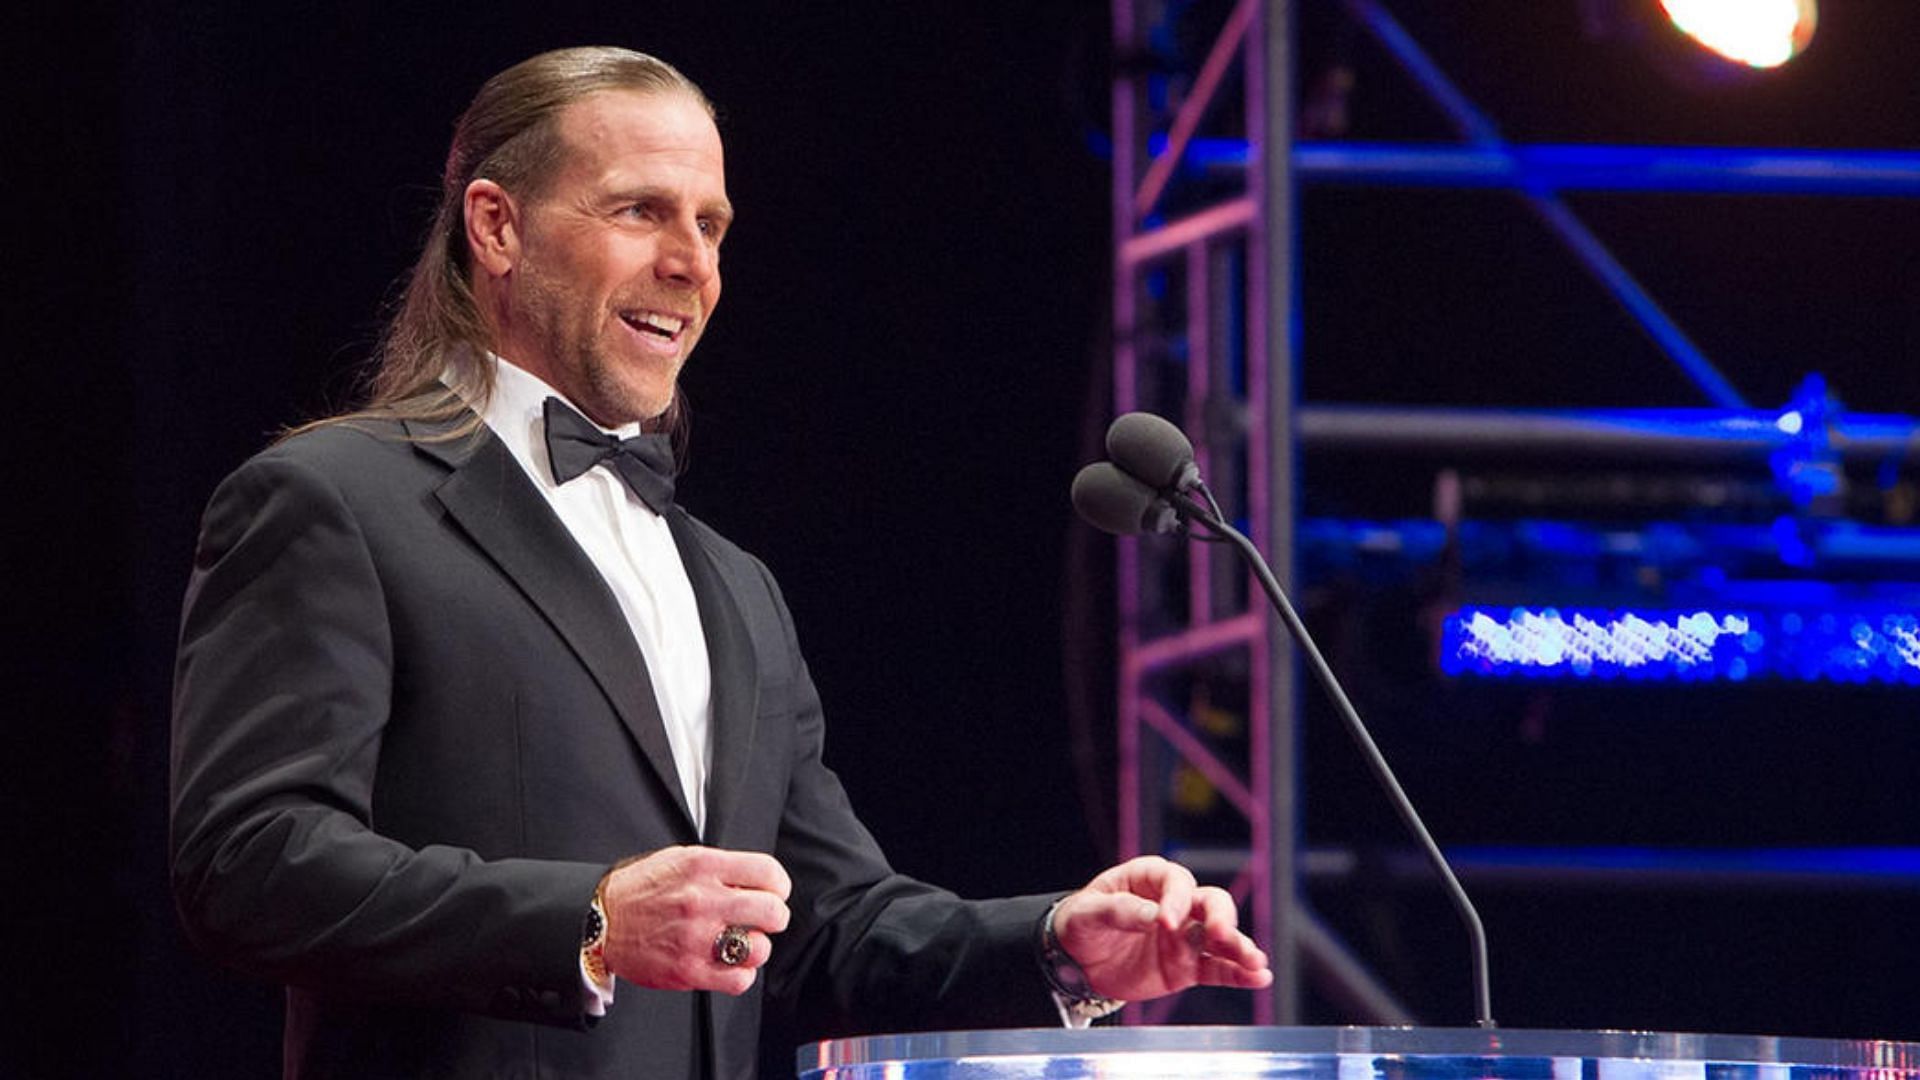 Shawn Michaels is a two-time Hall of Famer